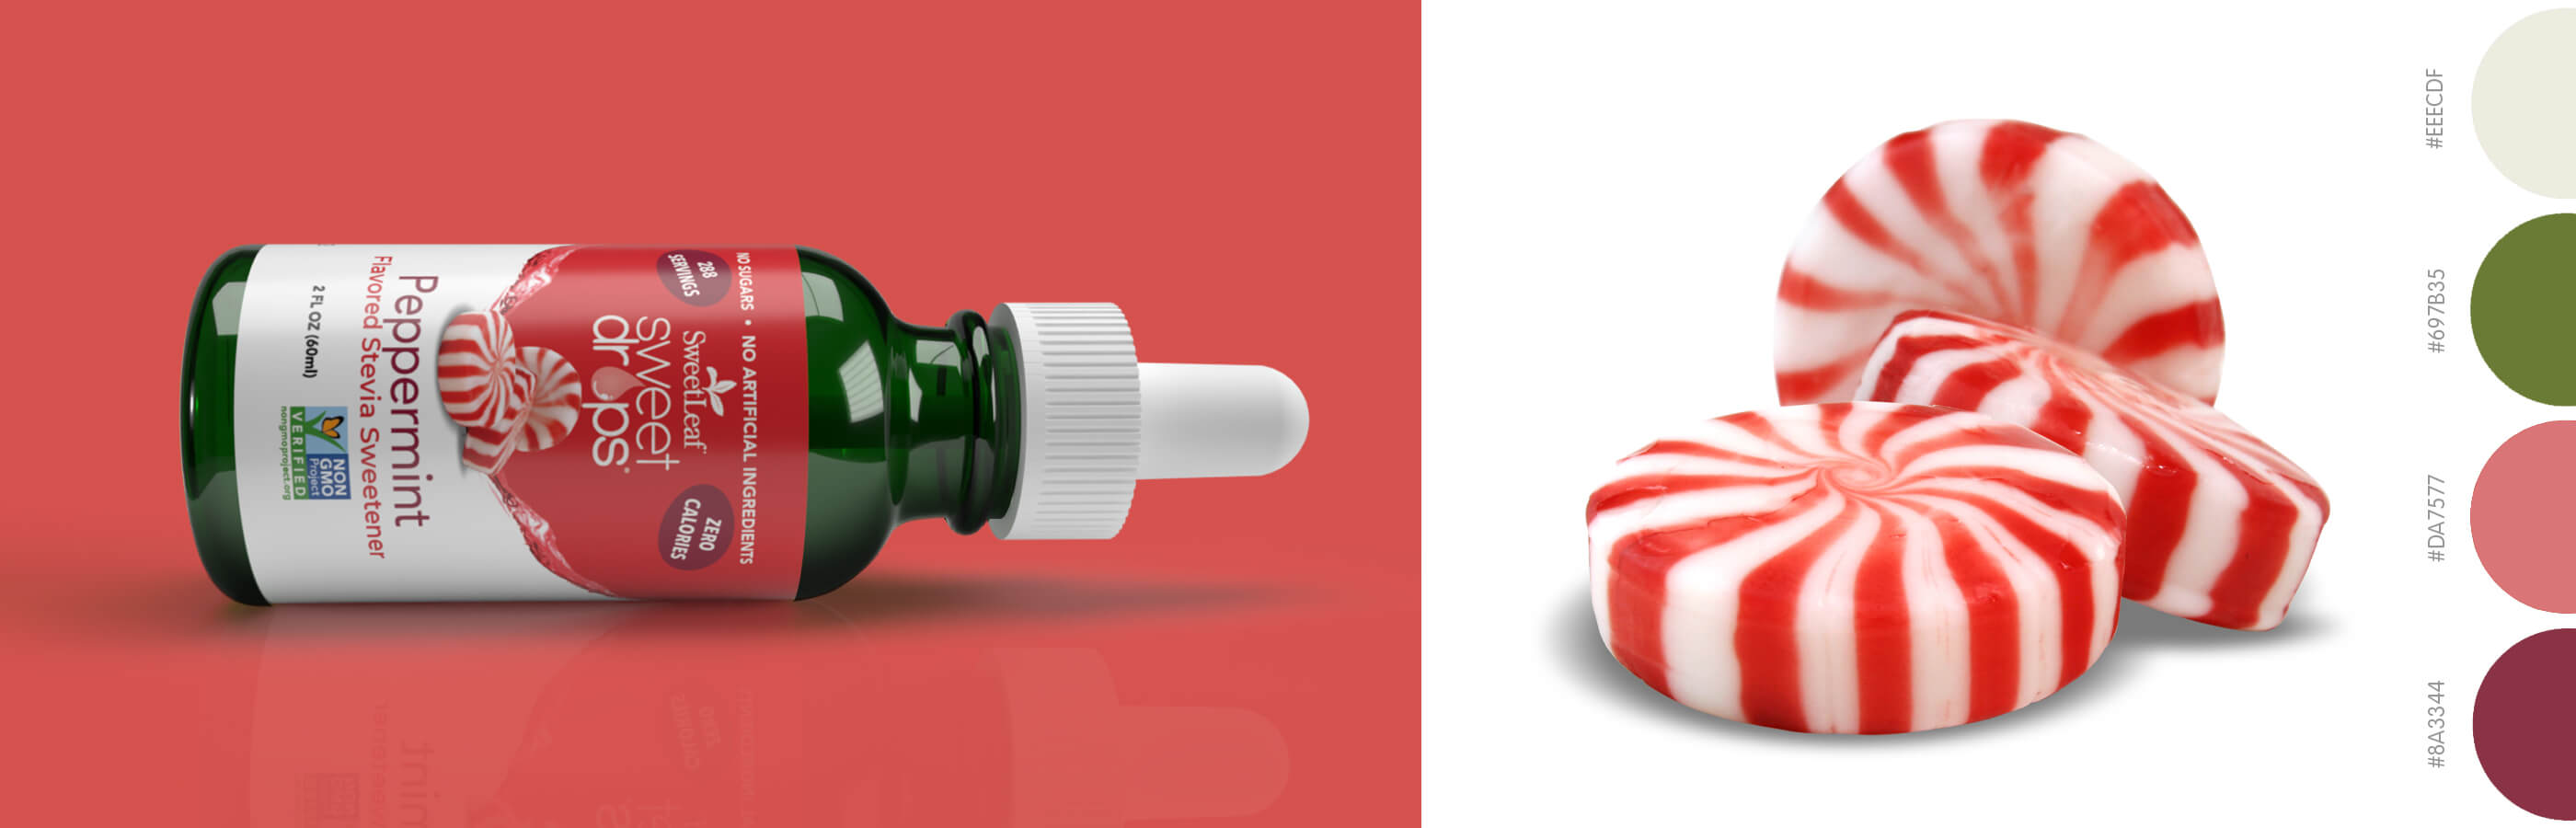 sweet drops peppermint package design image